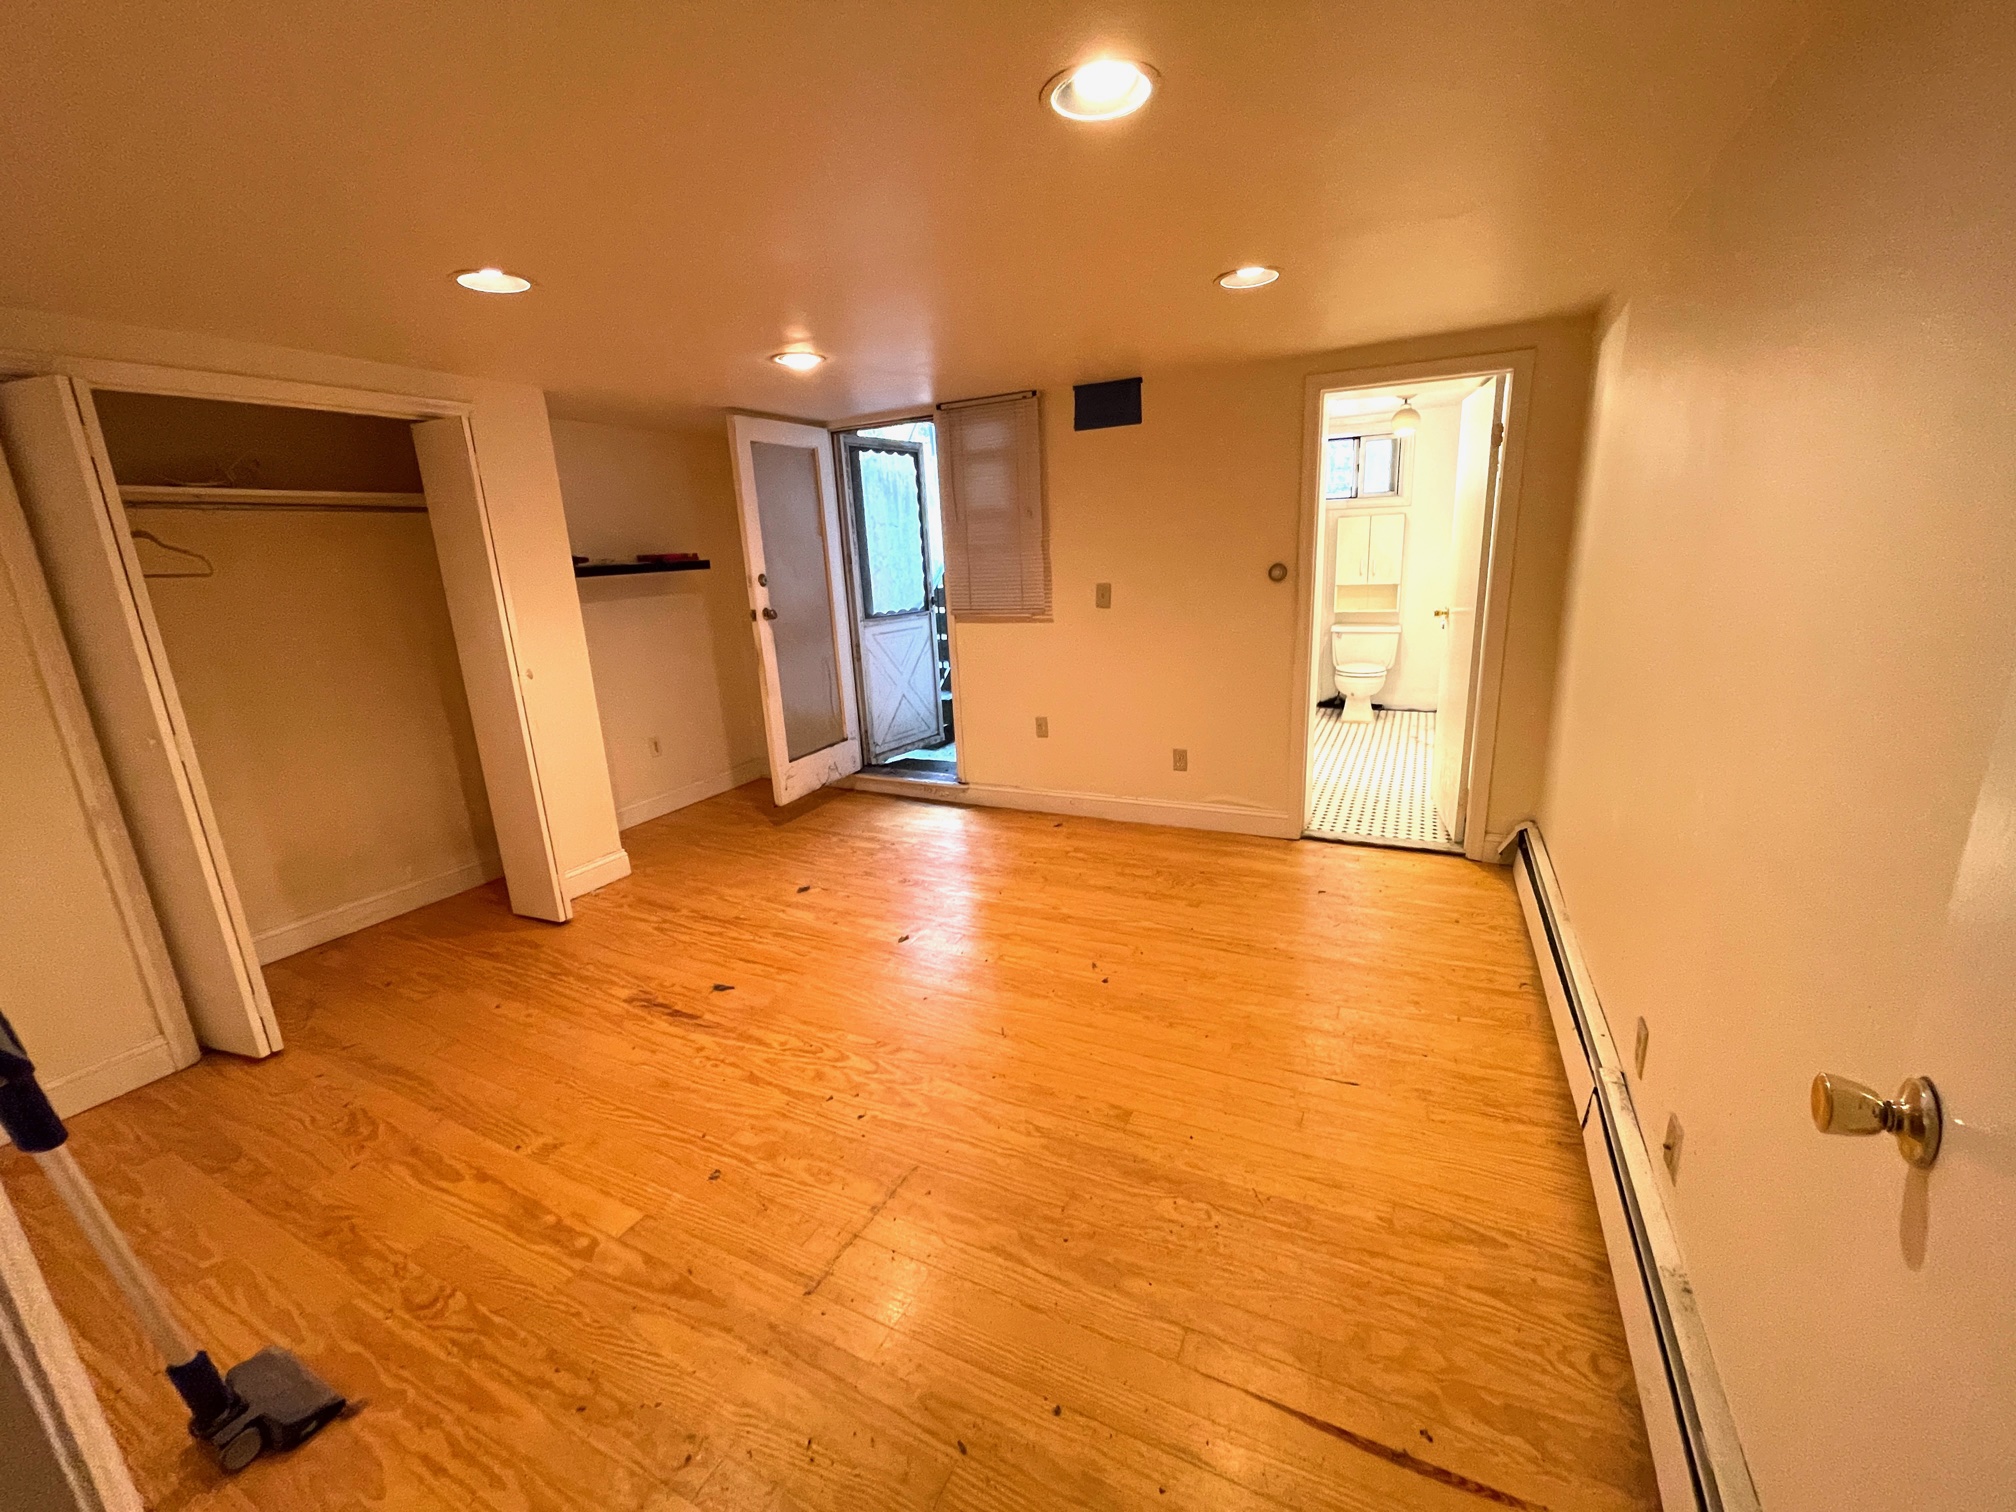 ***No Broker Fee***Spacious garden level apartment in this amazing location in Hoboken with WASHER/ DRYER in the unit plus cute little outdoor space! Apartment is located on the Garden level but the full size windows flood the unit with light!

Vacant 
Available July 1